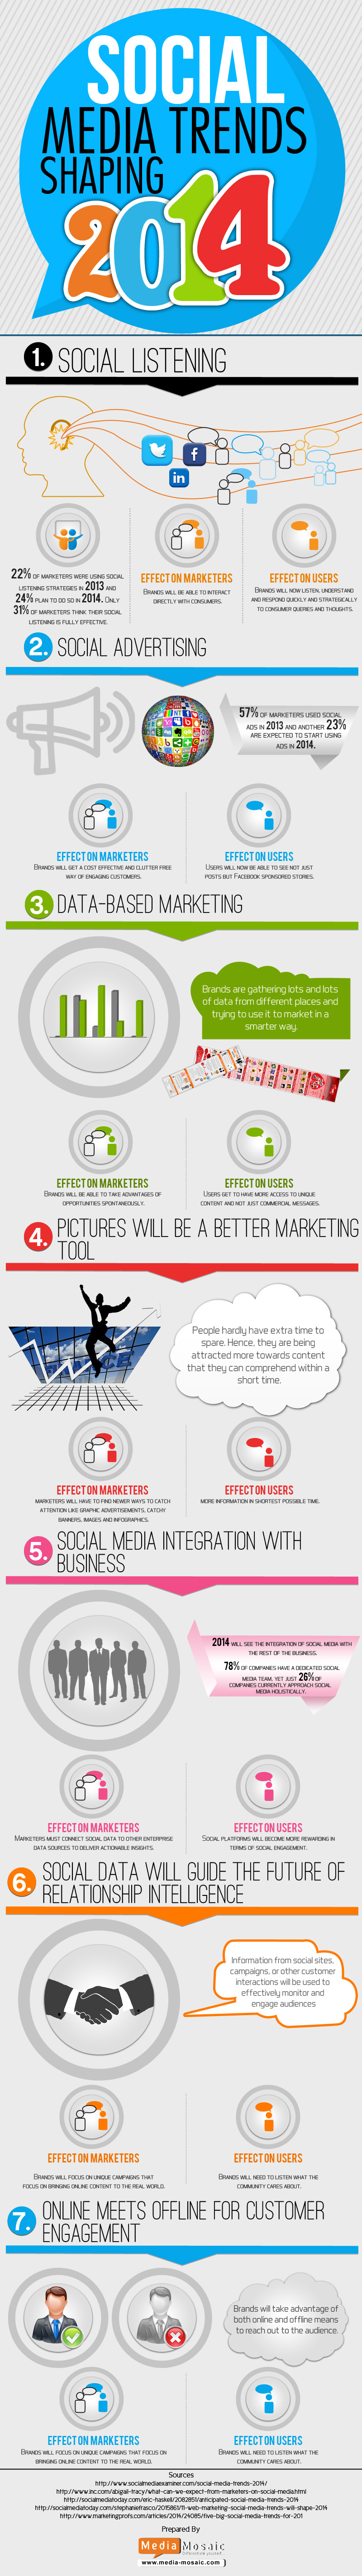 Social Media Shaping Trends 2014 Infographic